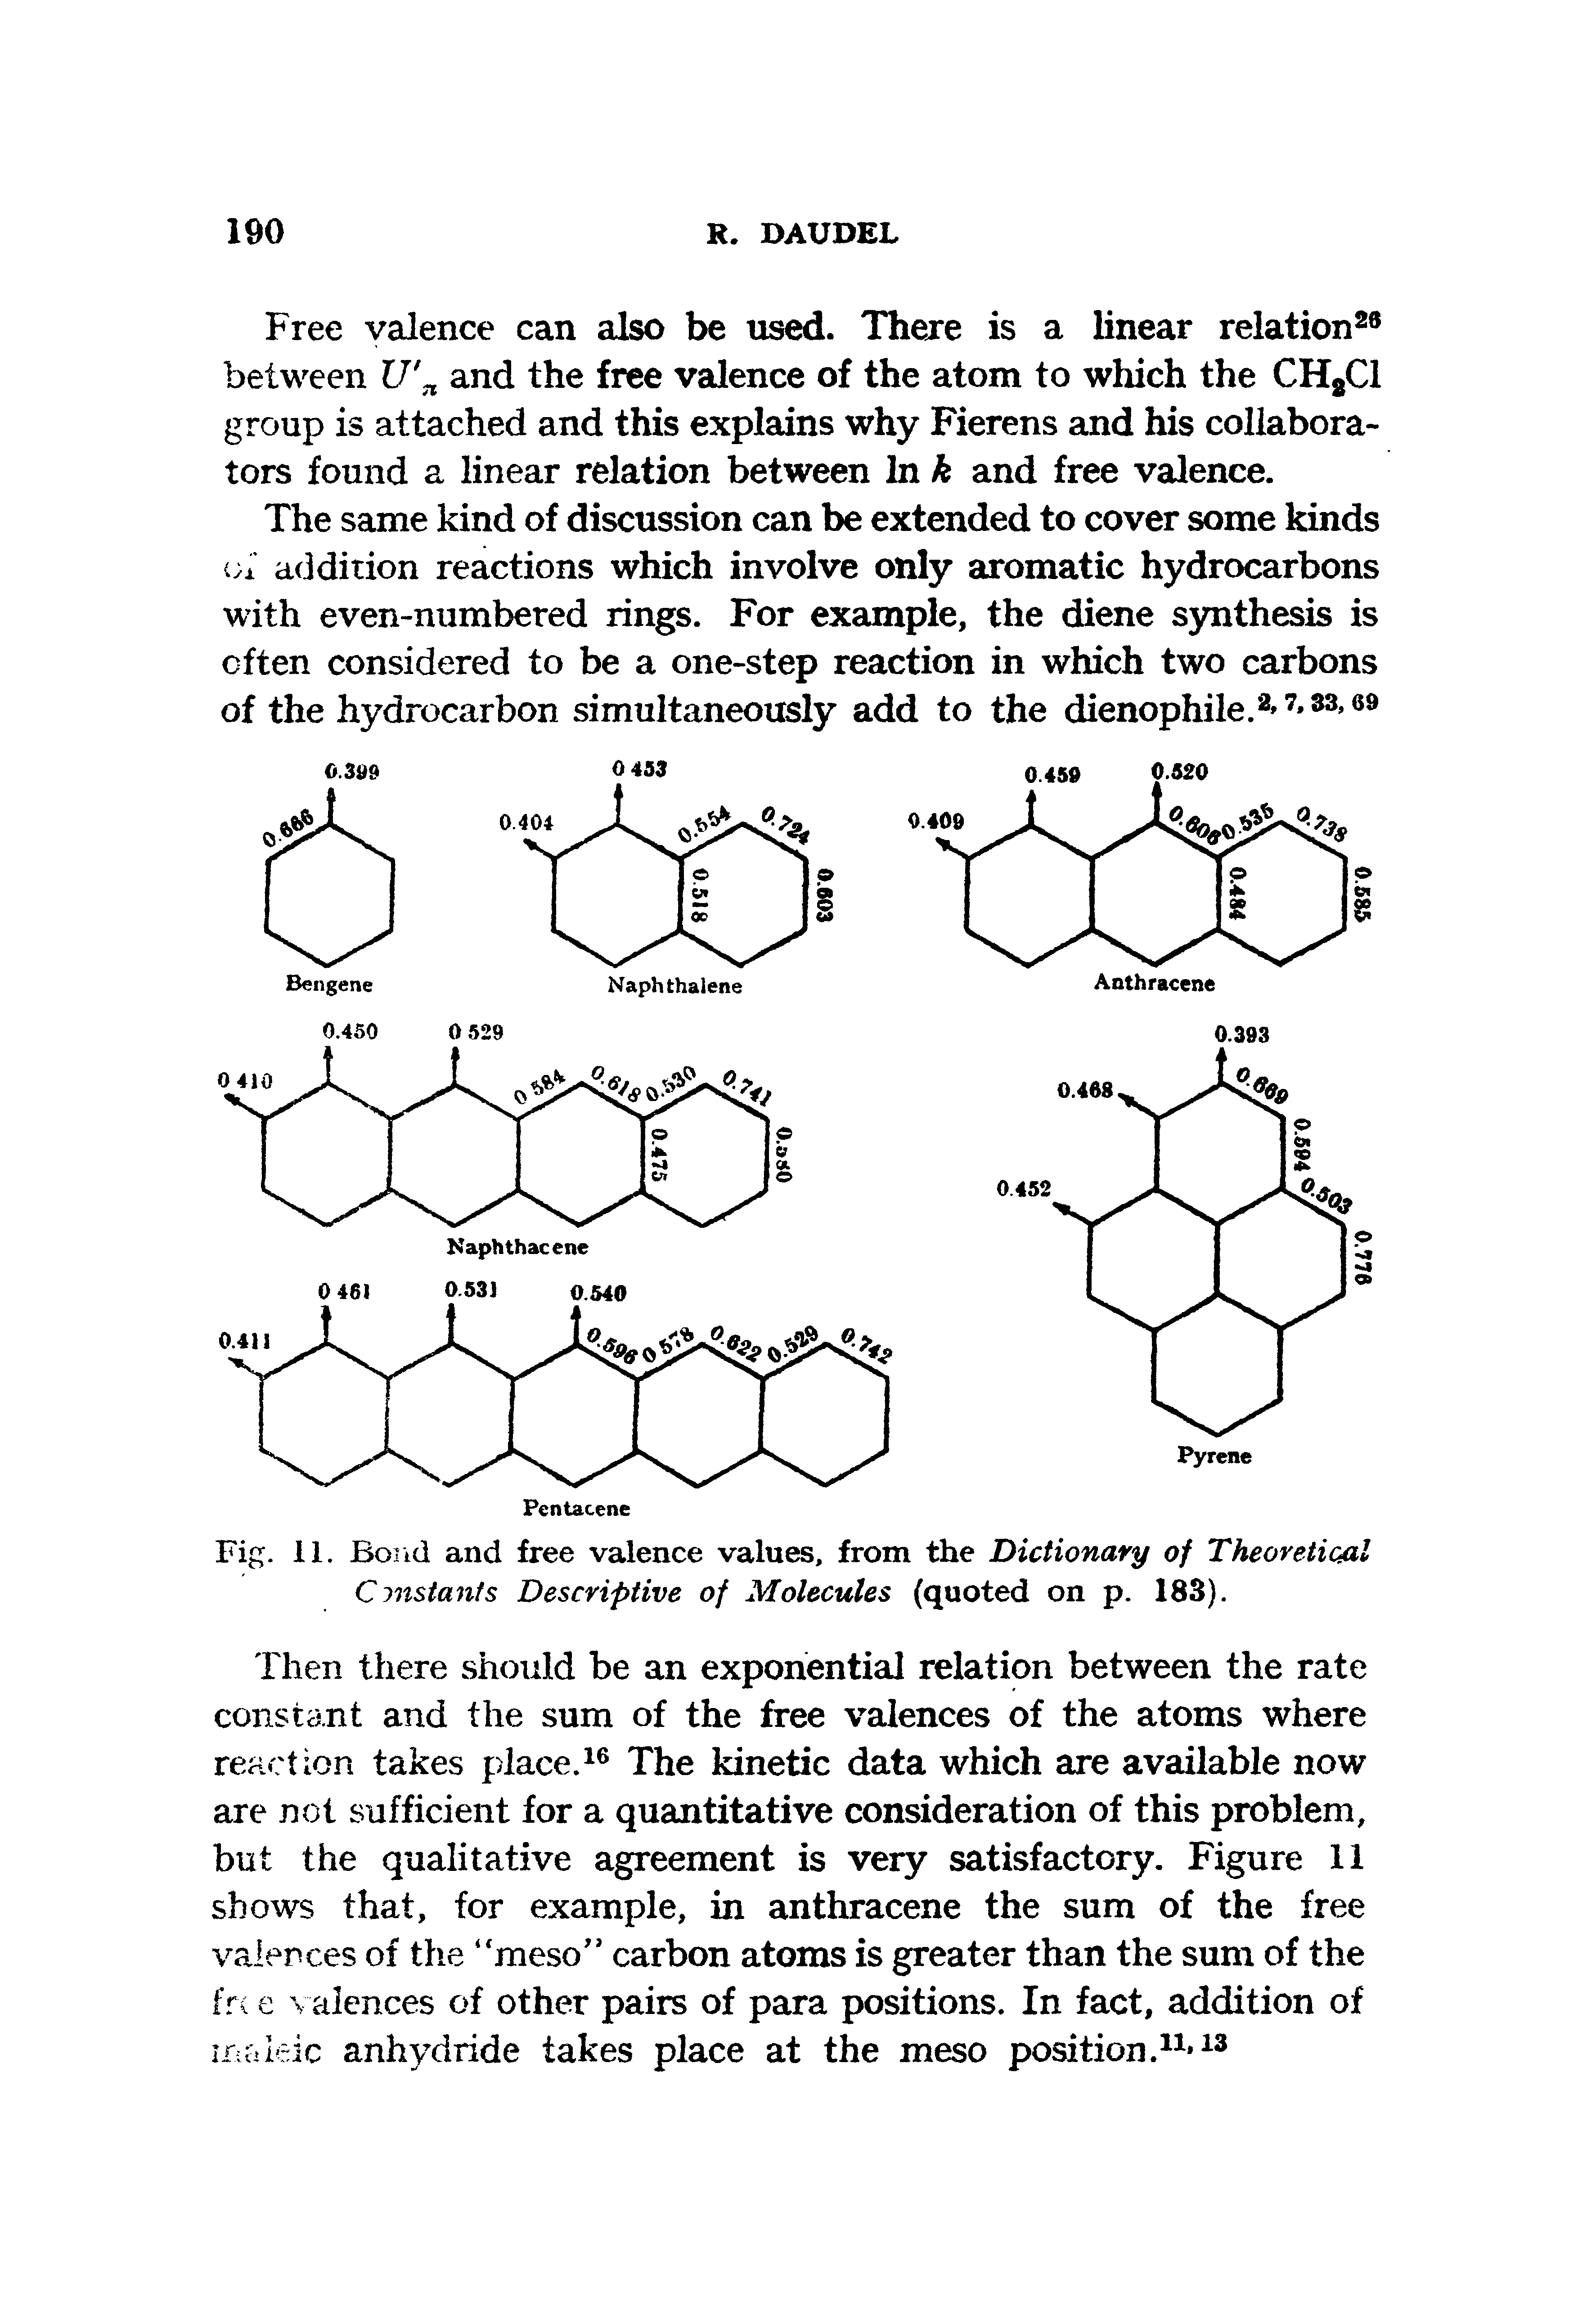 Fig. 11. Bond and free valence values, from the Dictionary of Theoretical Constants Descriptive of Molecules (quoted on p. 183).